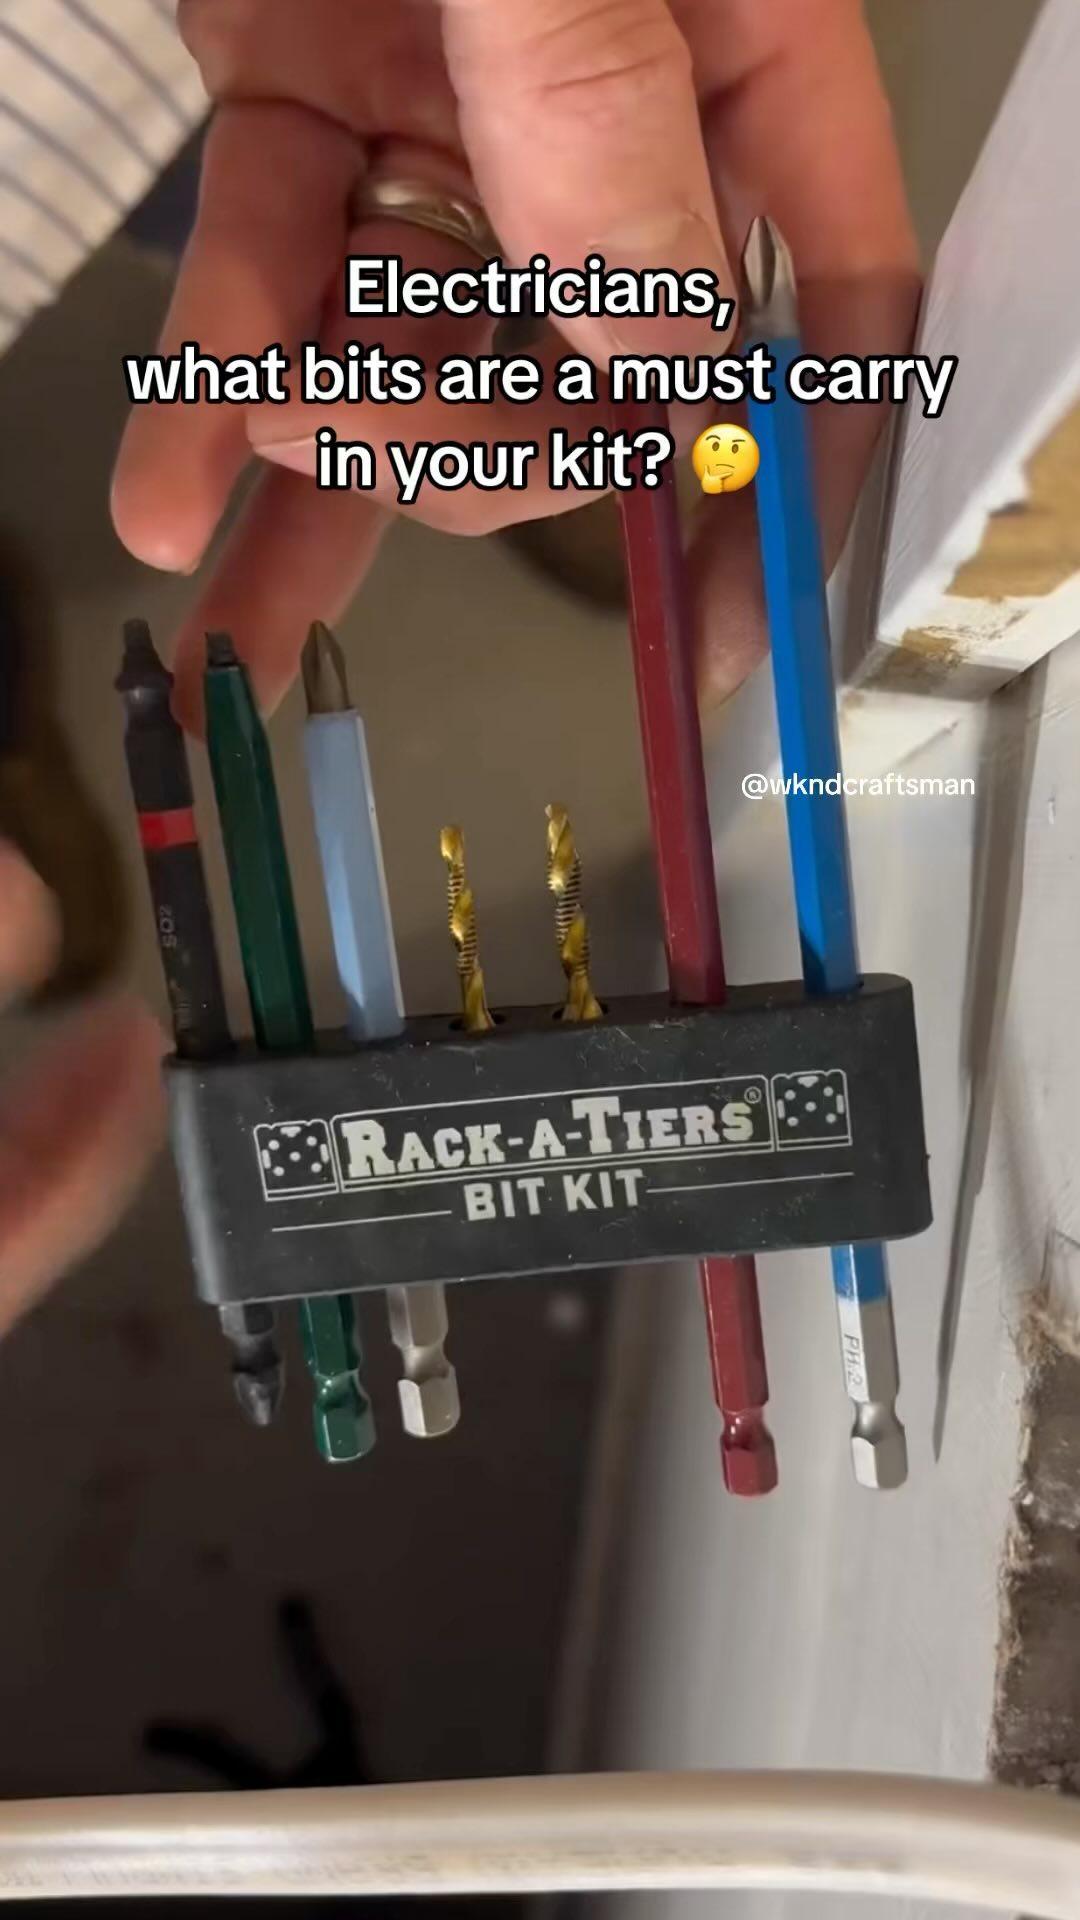 The Rack-A-Tiers Bit Kits have you covered for rough ins and finishing. Which bit do you use the most? Thanks @wkndcraftsman wkndcraftsman for the video! #rackybits #rackatiers #rackatierstools #sparky #electricians #tradie #bluecollarlife #electriciantools #bluecollar #electricianlife #hardhat #commercialelectrician #resi #residentialelectrician